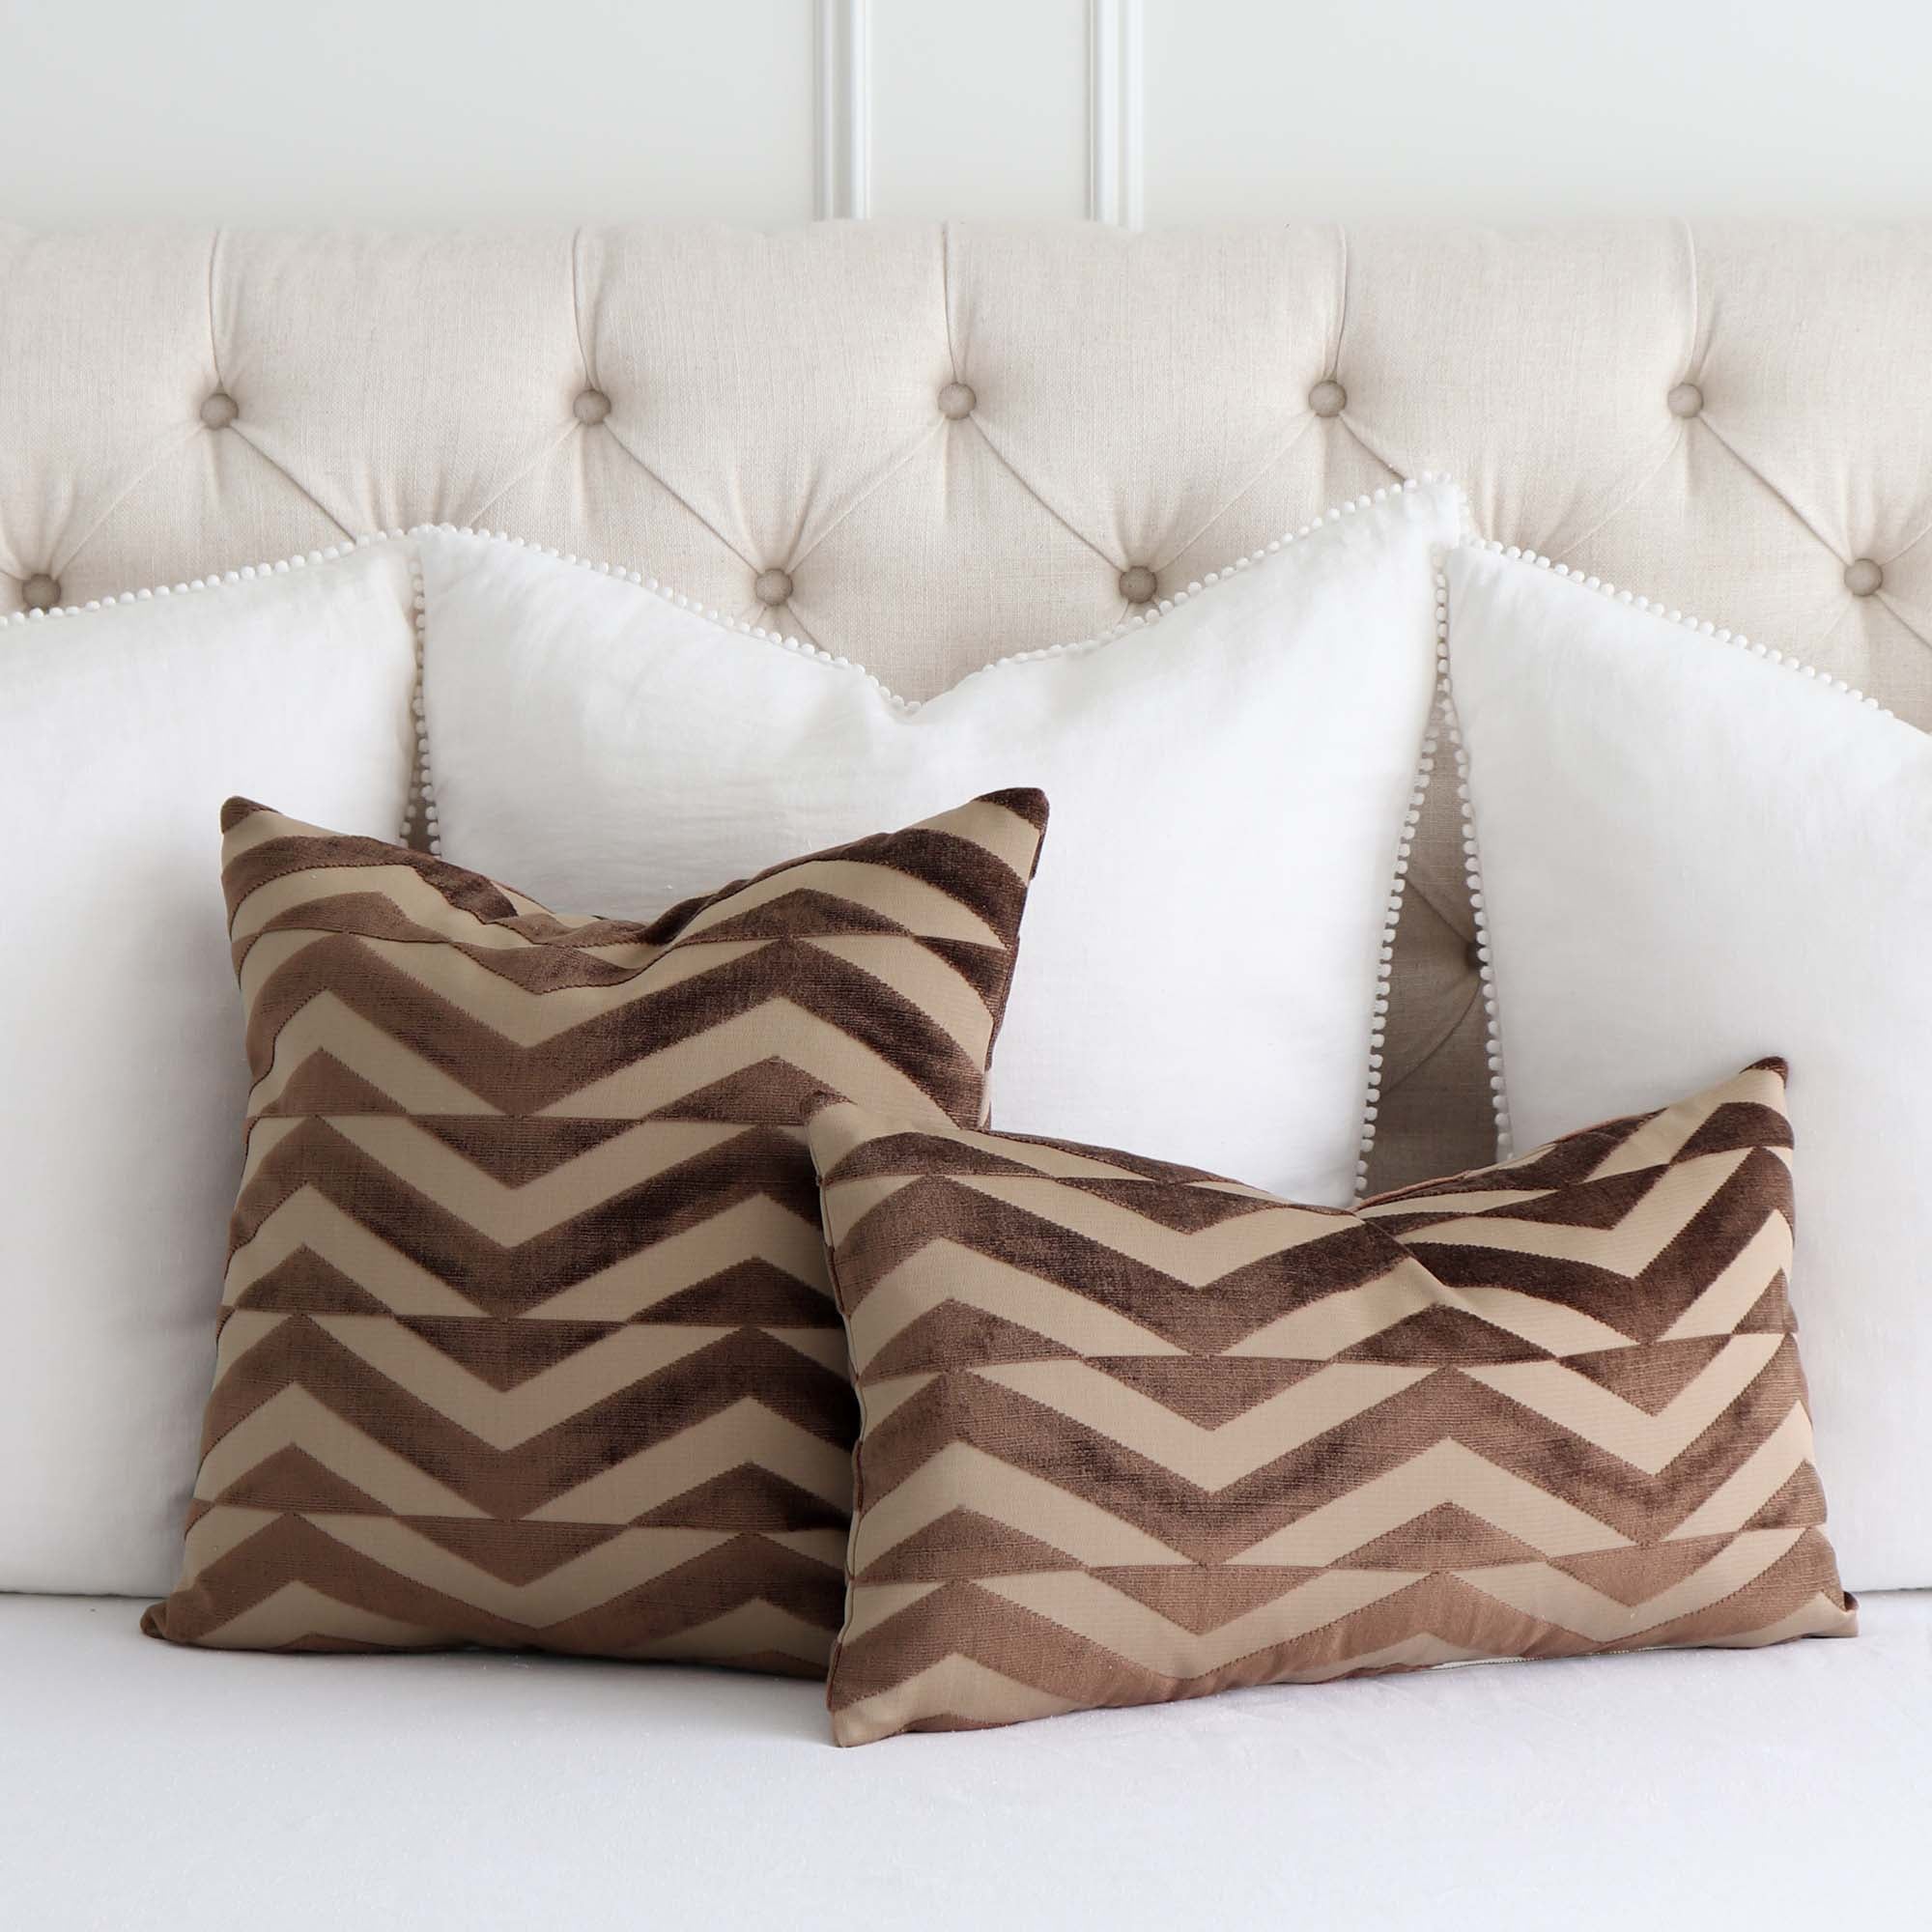 Schumacher Broken Chevron Brown and Camel Cut Velvet Decorative Designer Throw Pillow Cover with Large White Euro Shams on Bed